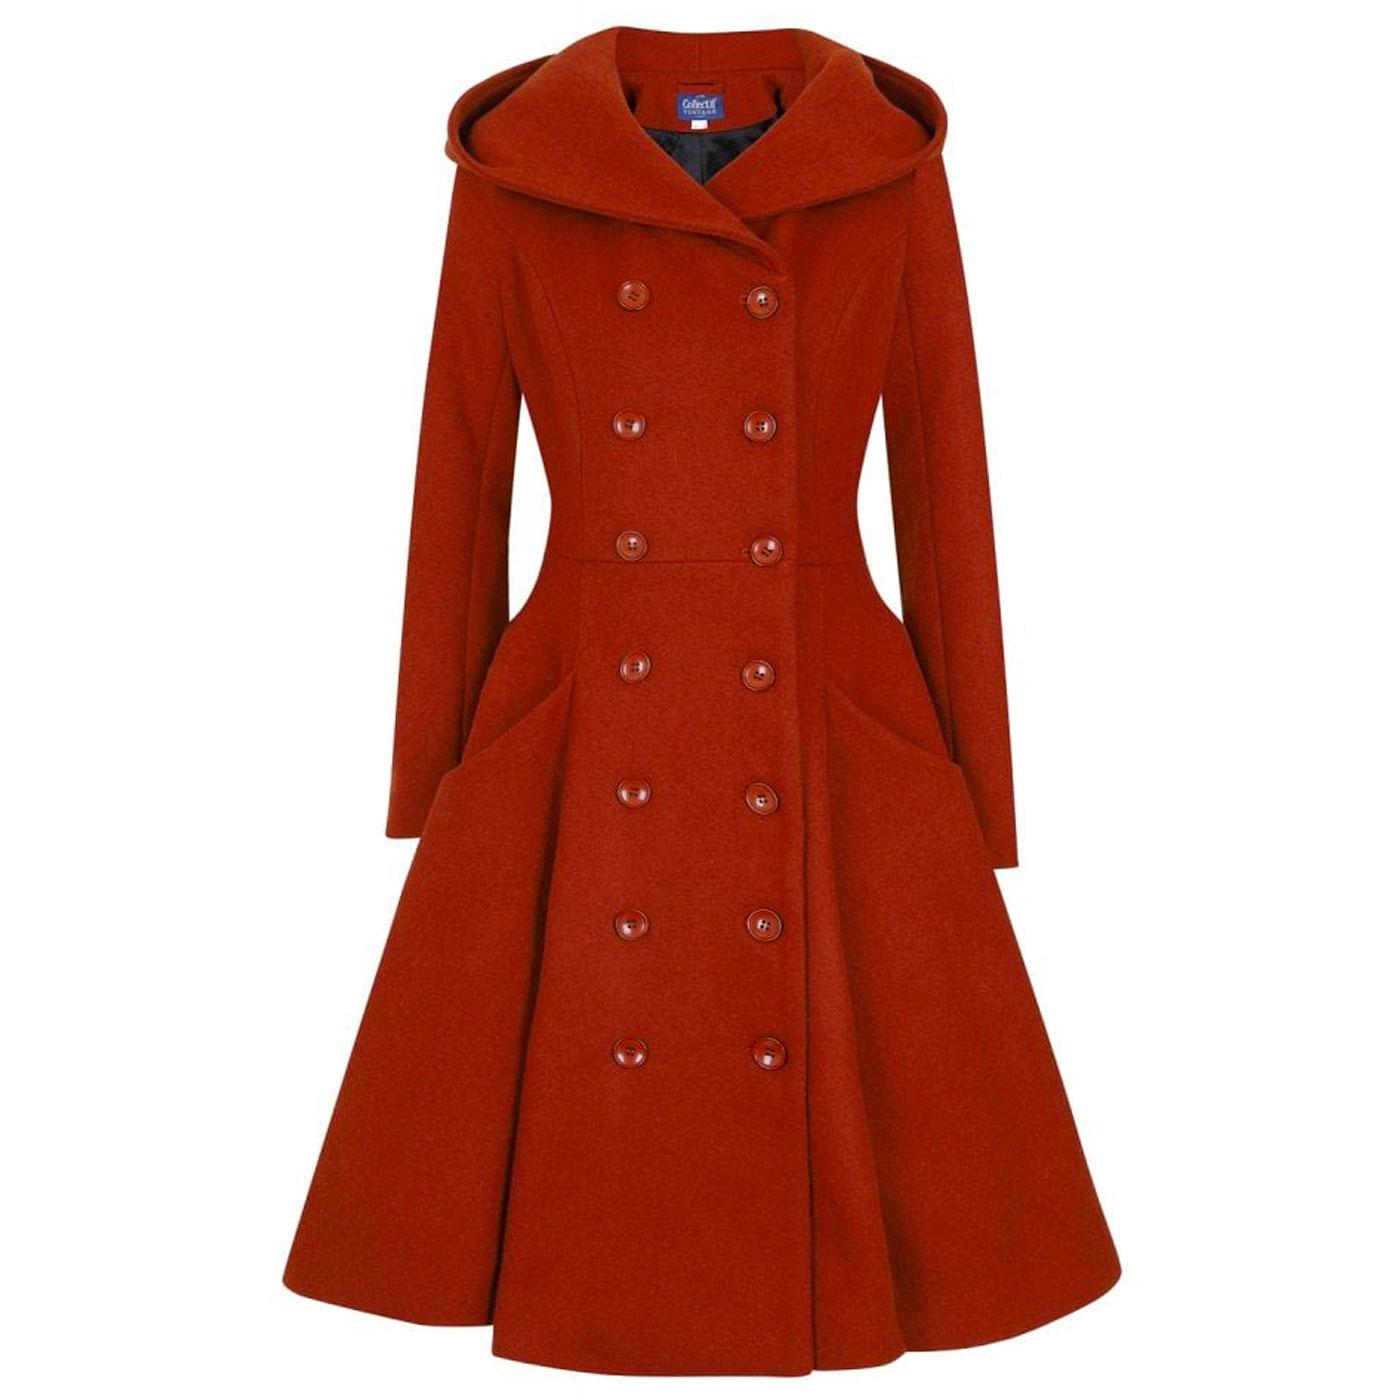 COLLECTIF Heather 1950s Hooded Autumnal Swing Coat